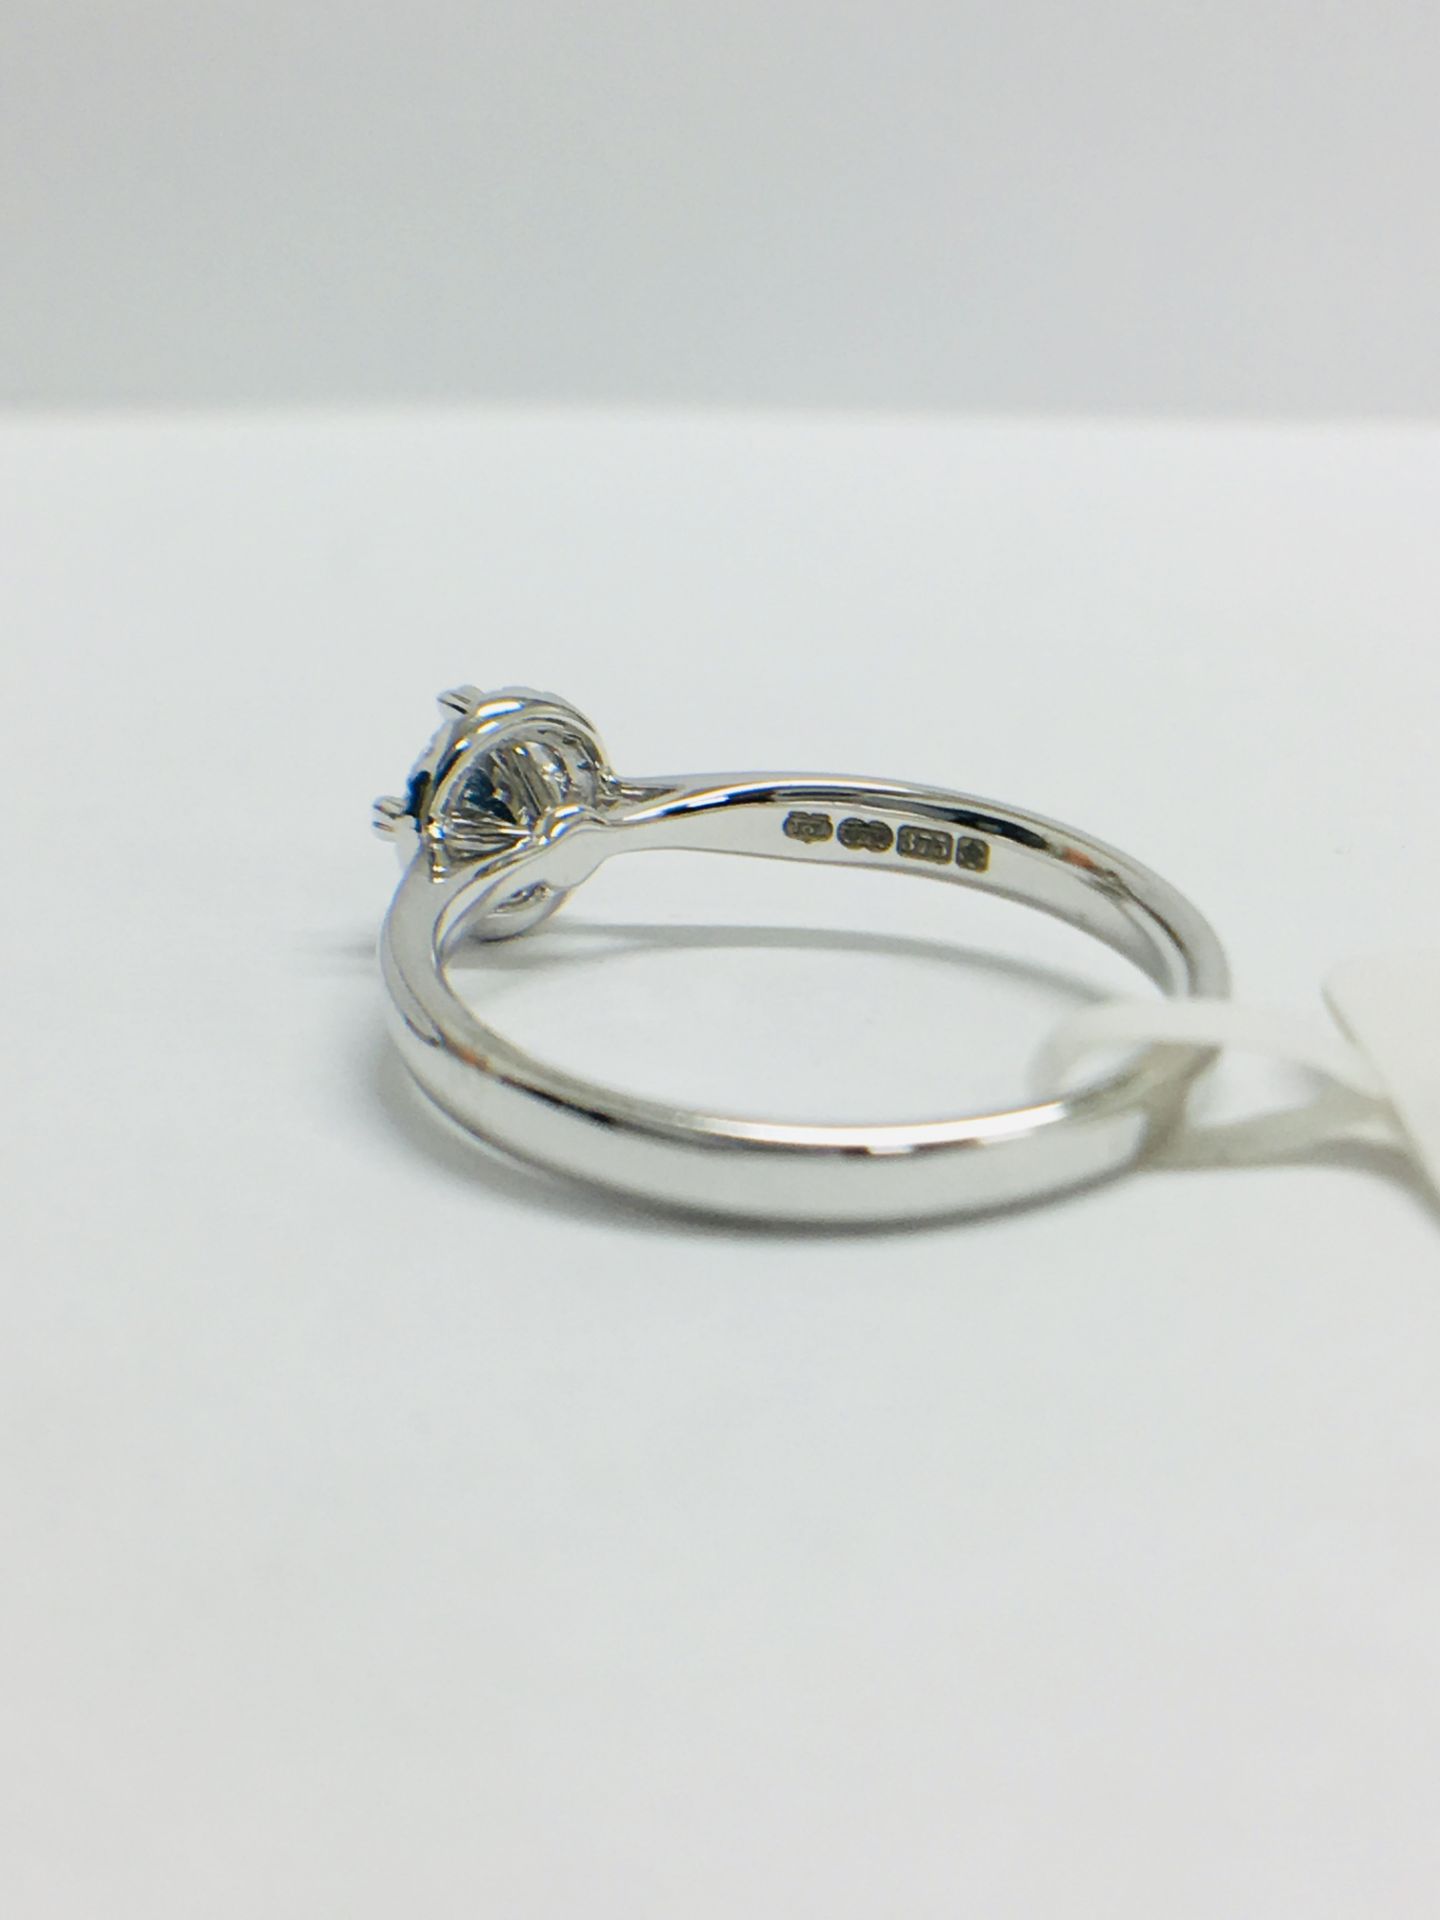 9CT White Gold diamond Solitaire illusion set ring with a millegrain edge shank - Image 5 of 11